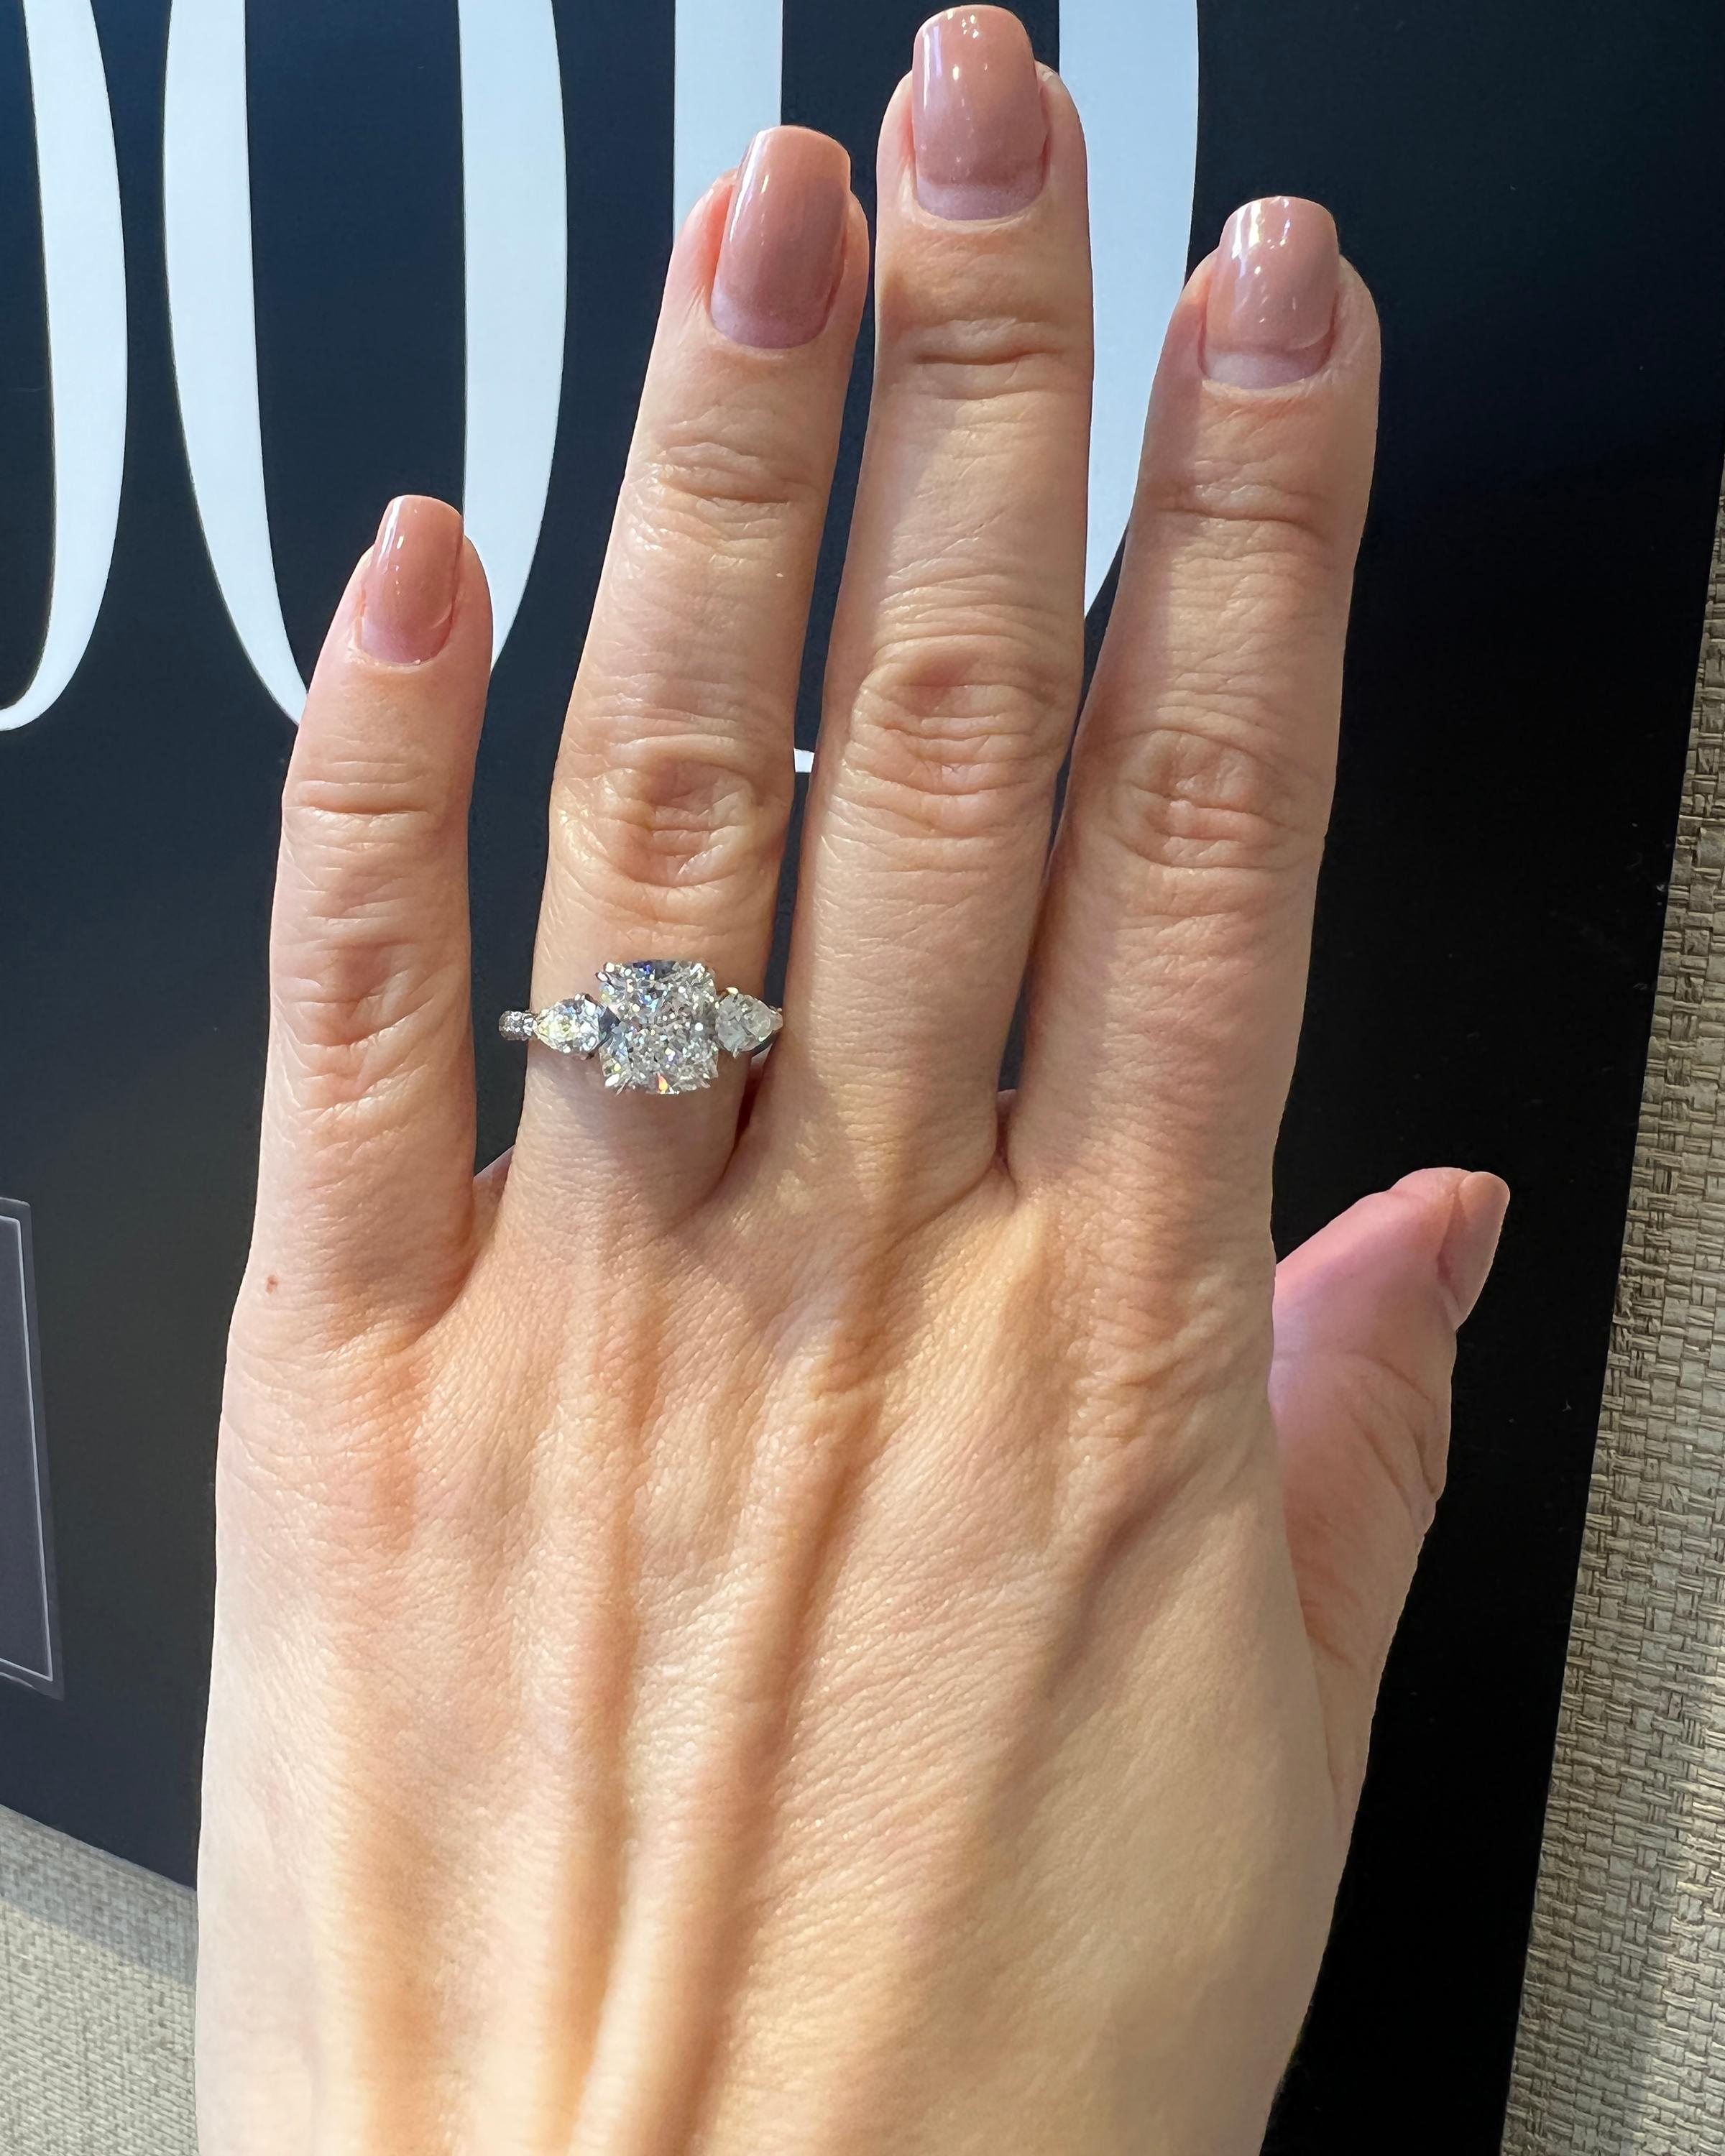 An engagement ring comprising of a center cushion diamond and two side pear shape diamonds. Pave diamonds half way on the band, by Spectra Fine Jewelry.
The center stone is accompanied by a GIA report stating that it's H color, VS1 clarity.
Metal is